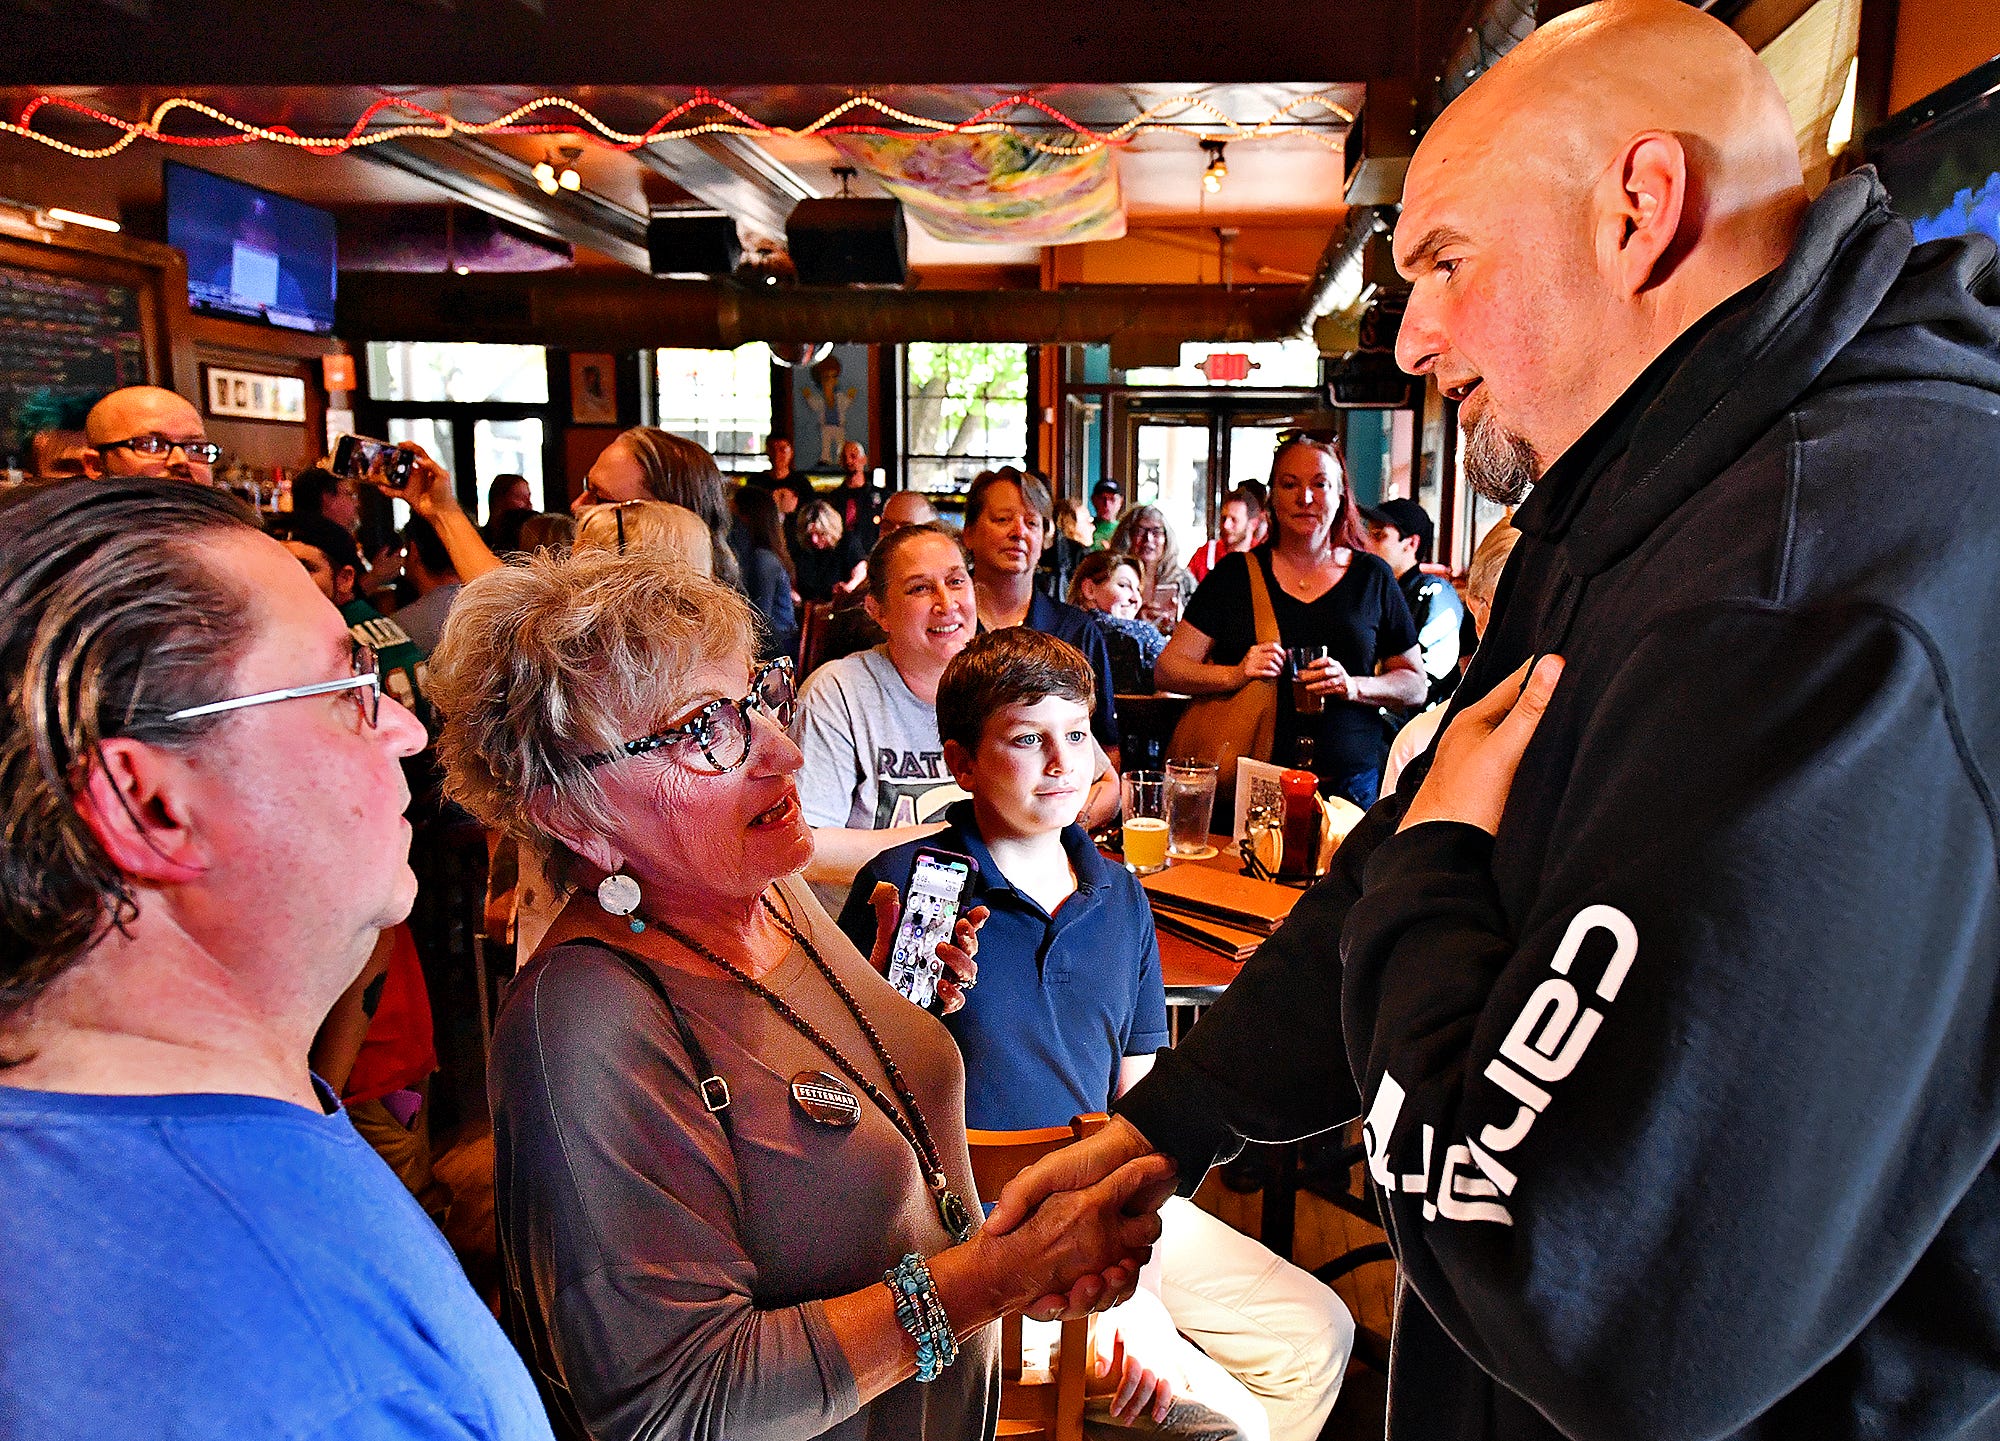 From left, Fred Wallick, of Dover Township, and Joshua Peterman, 11, of West York Borough, look on as Sherry Sharp, of New Salem Borough greets Lt. Gov. John Fetterman during a campaign stop at Holy Hound Taproom in York City, Thursday, May 12, 2022. Fetterman is running for U.S. Senate. Dawn J. Sagert photo